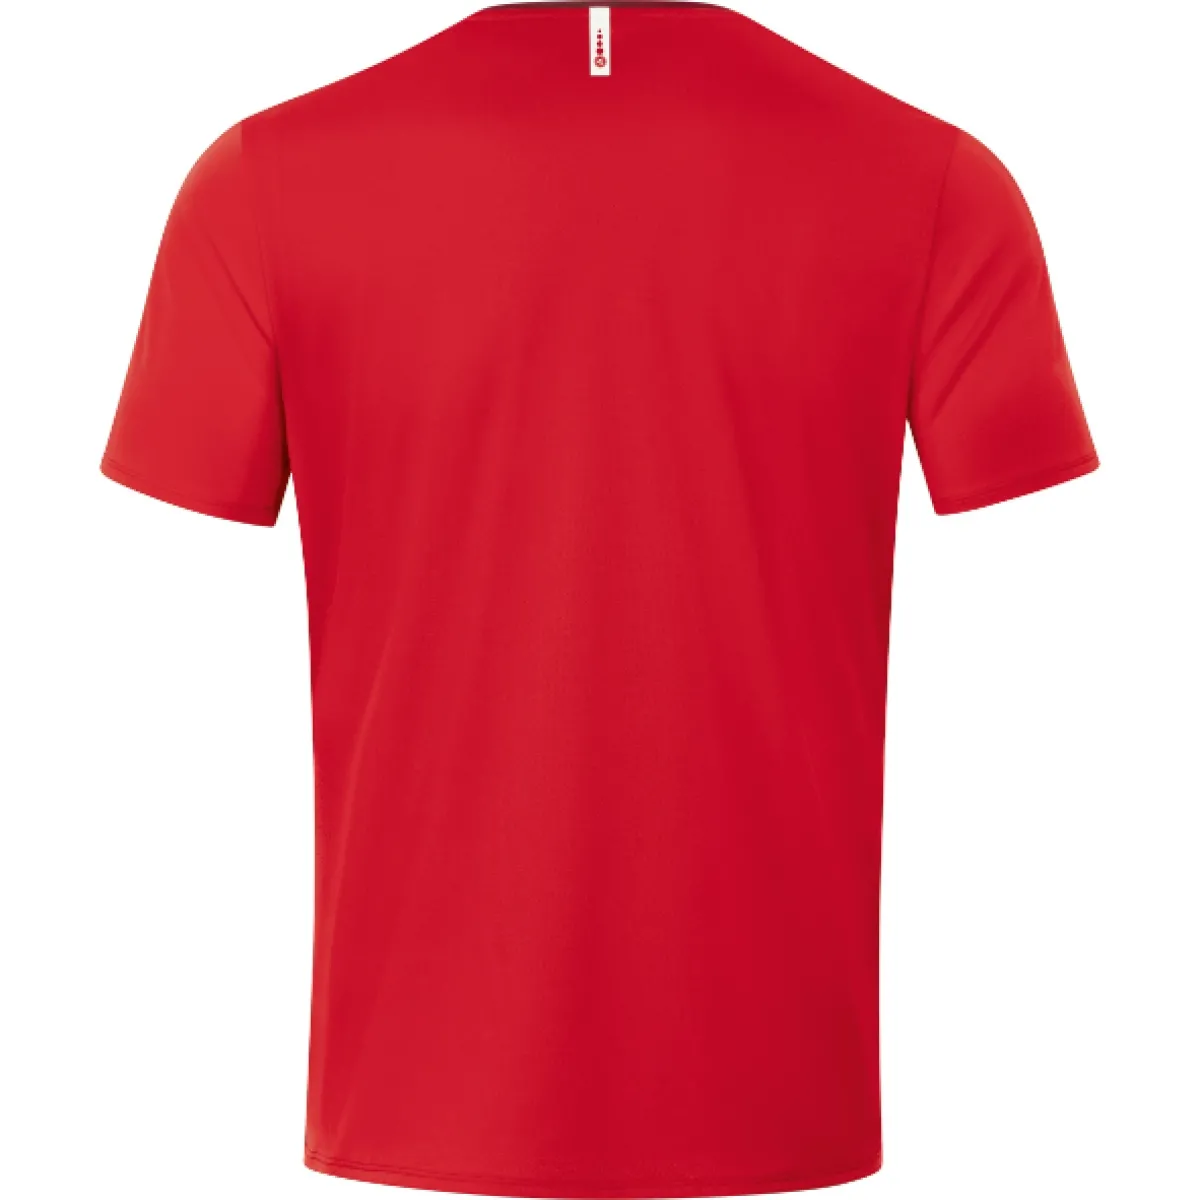 Jako T-Shirt Champ 2.0 red/wine red for women, men and children